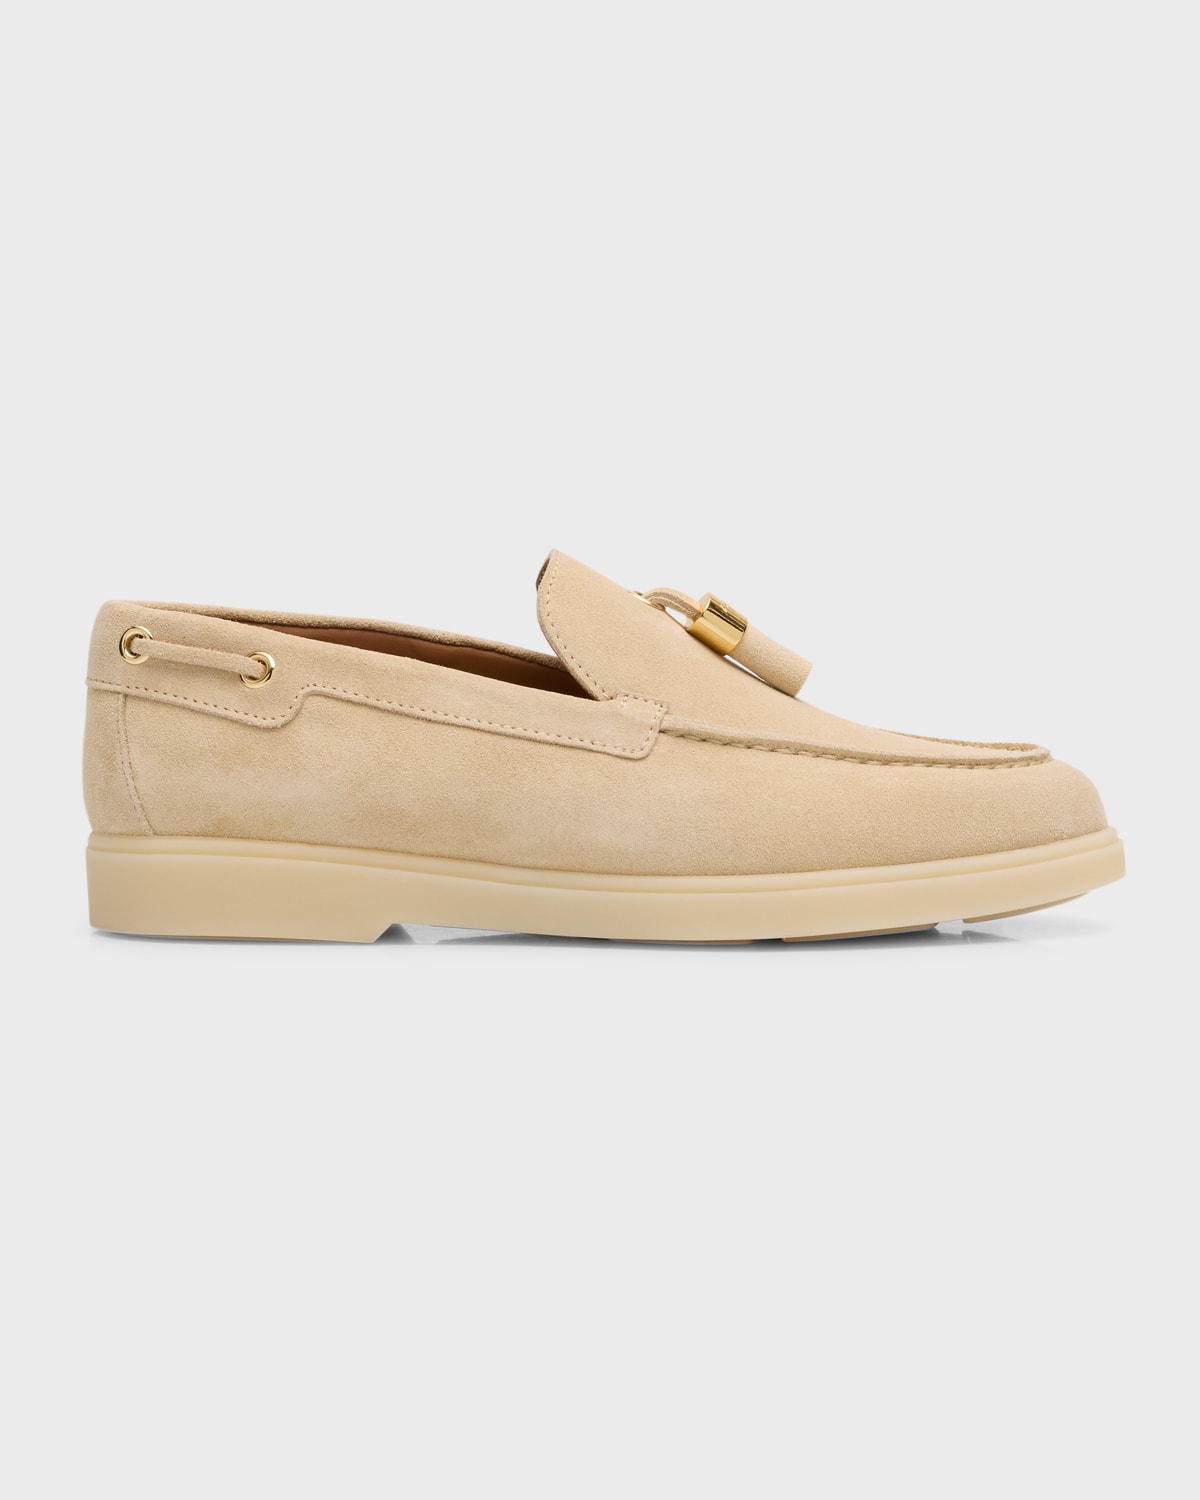 Avela Suede Tassel Casual Loafers